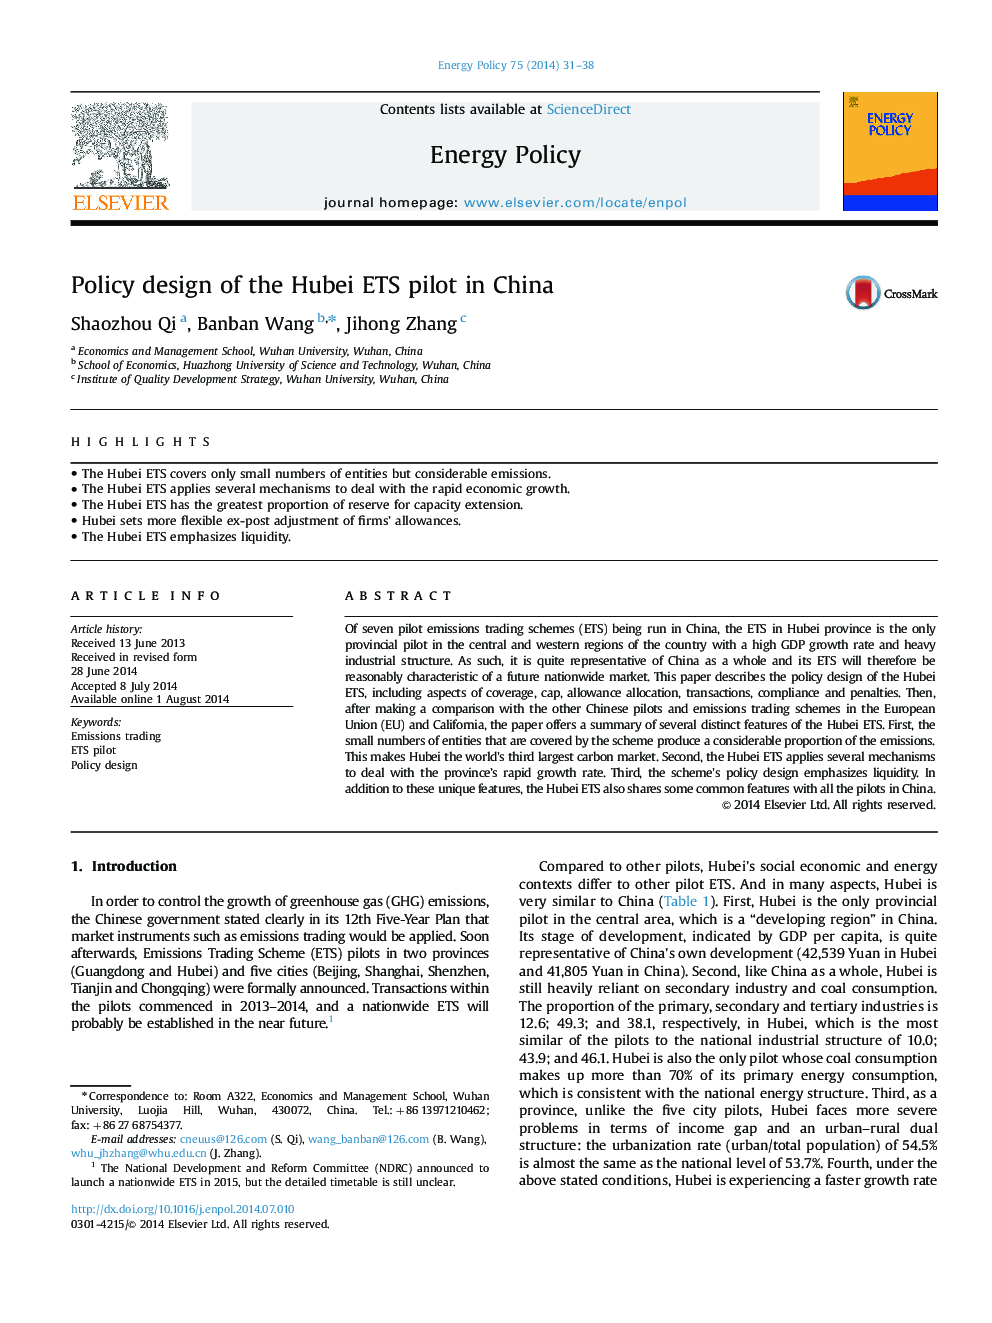 Policy design of the Hubei ETS pilot in China